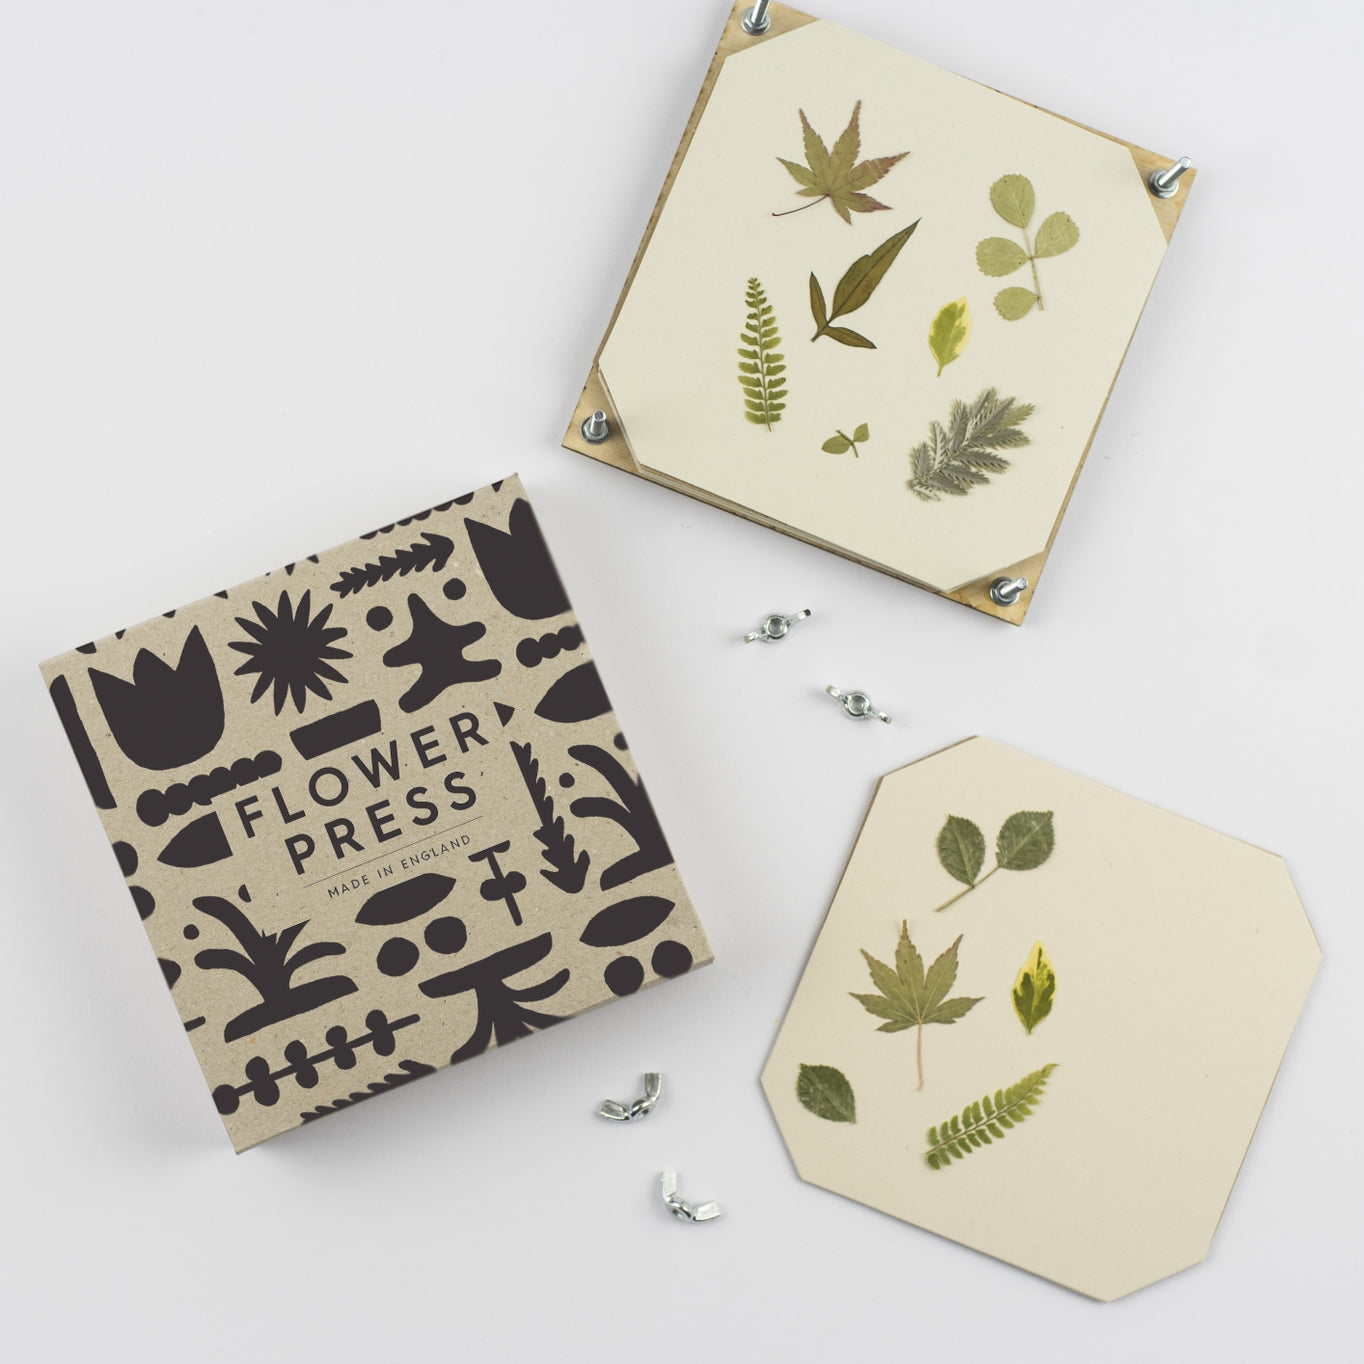 This well-sized flower press allows you to preserve the flowers and leaves you find while out on your wonders. The press comes complete with 5 sheets of corrugated card and 8 of sugar paper to give ample space to press flowers. 